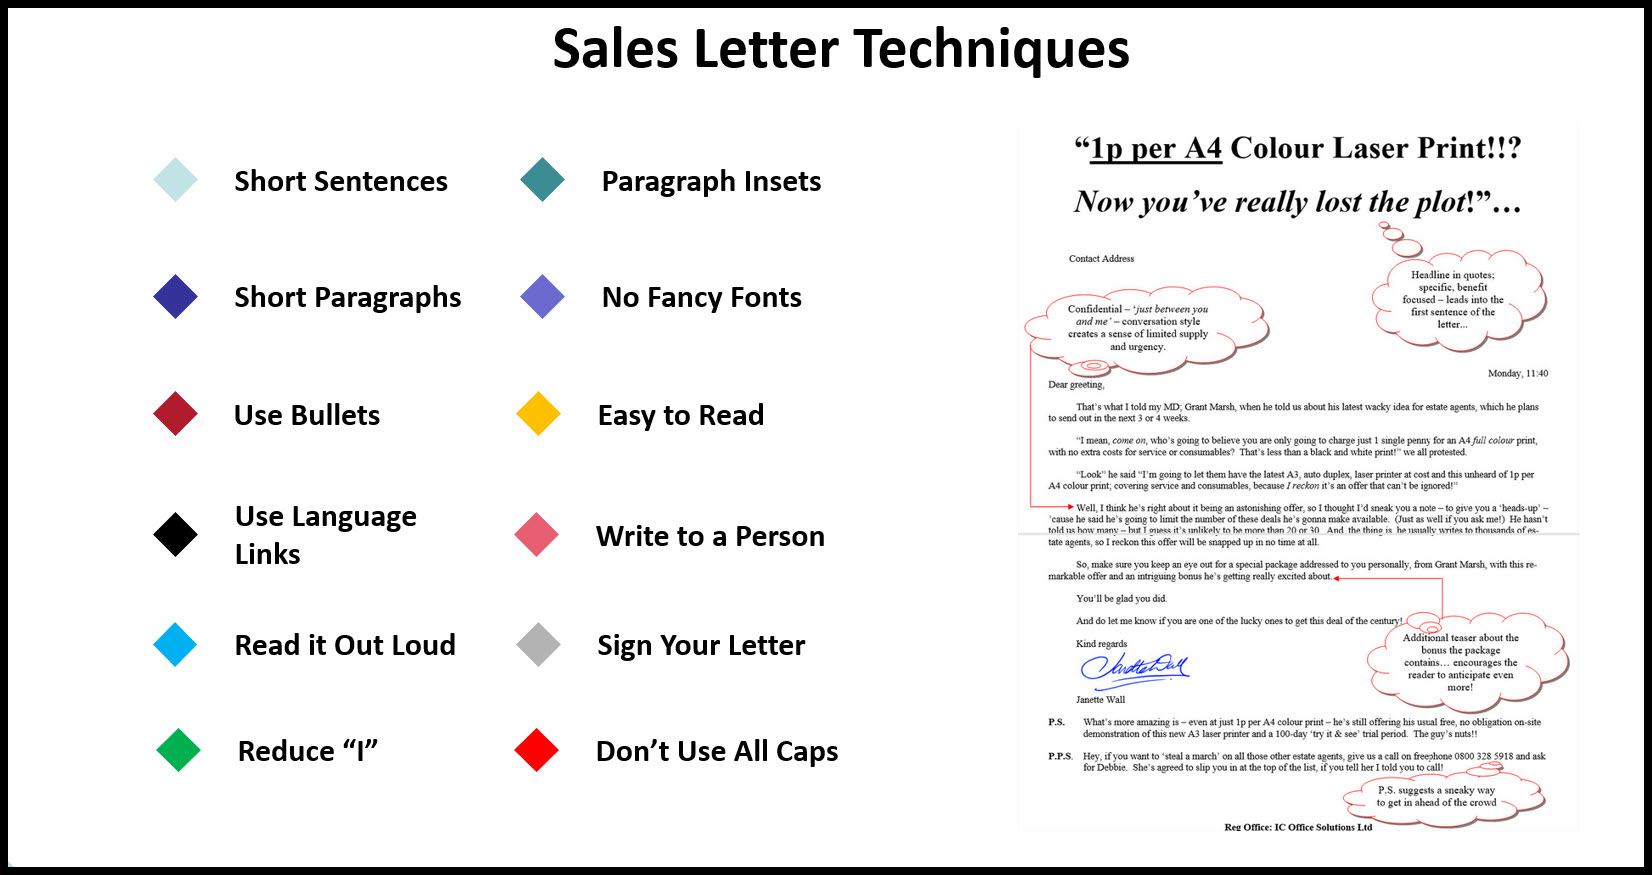 How to write a sales letter. Discover 20 techniques to get your sales letter read and responded to